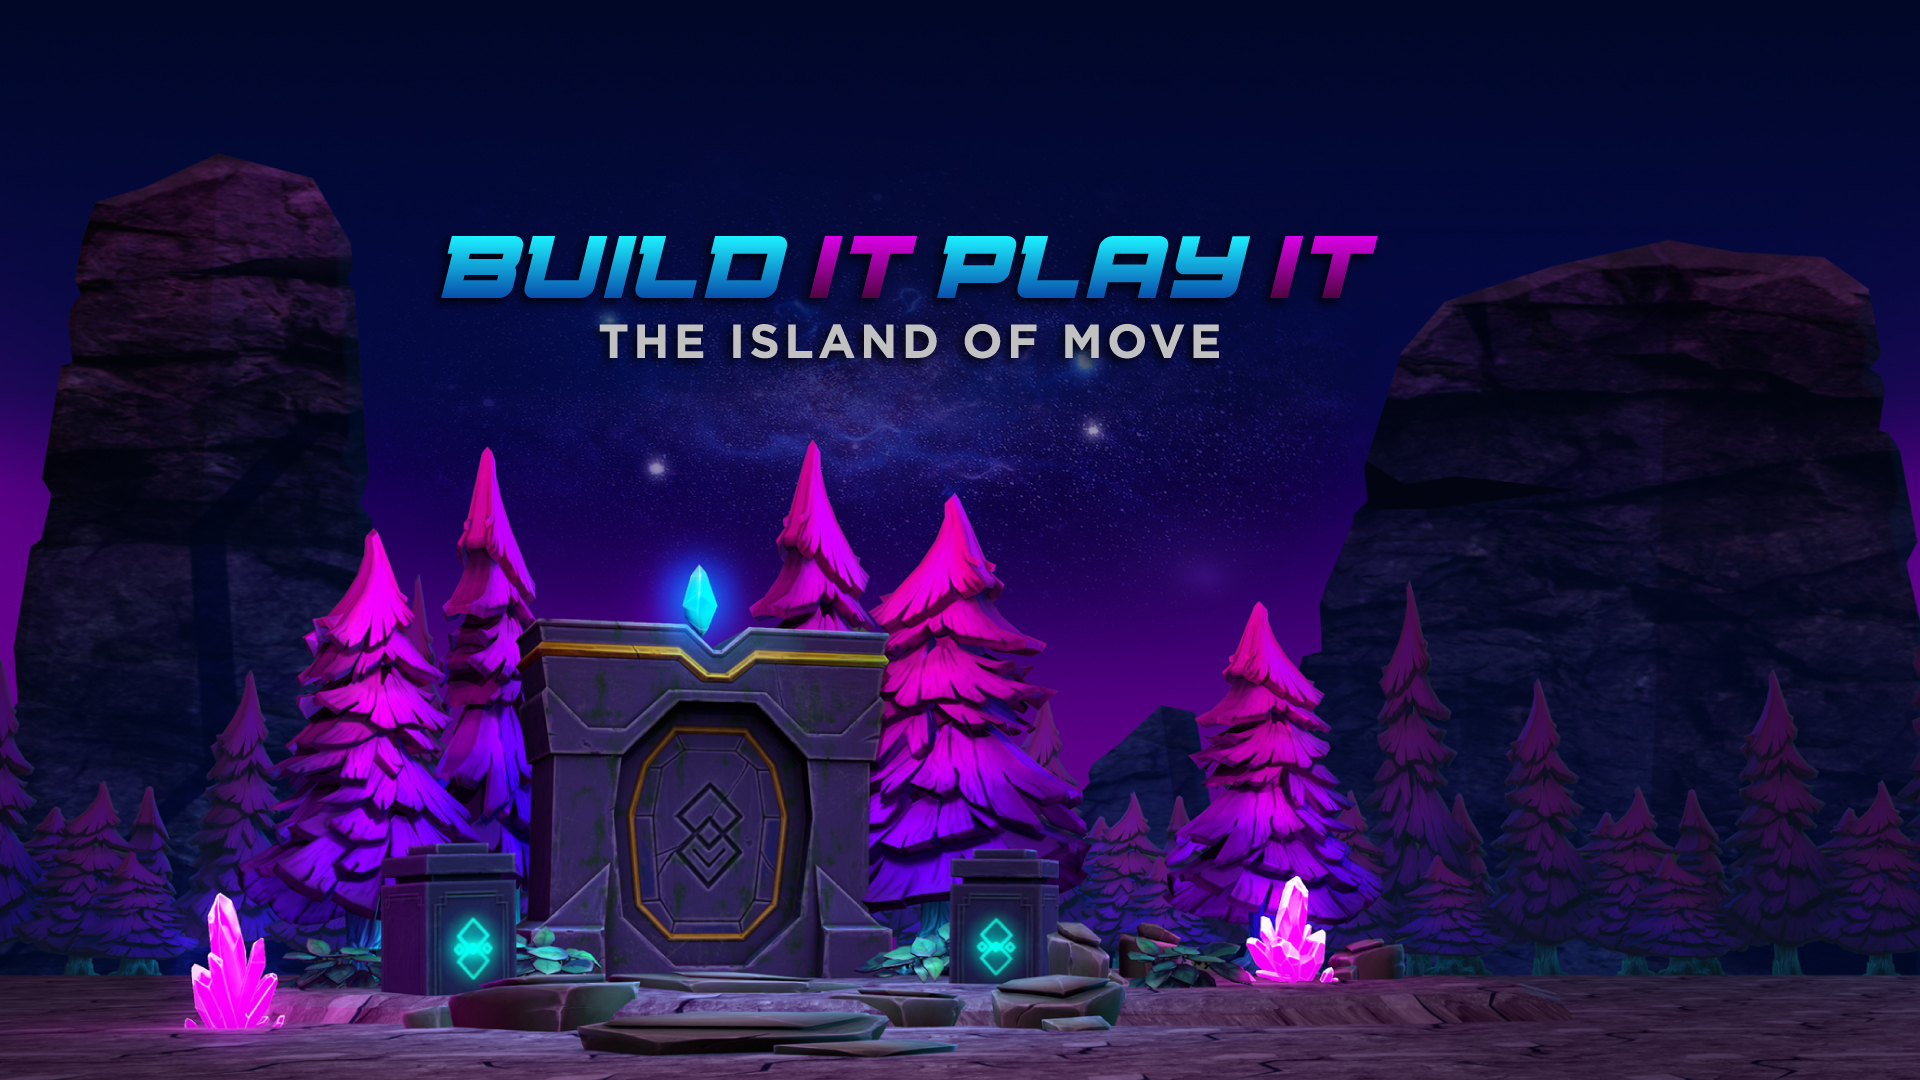 Work Up Animations And A Sweat In The Build It Play It Challenge